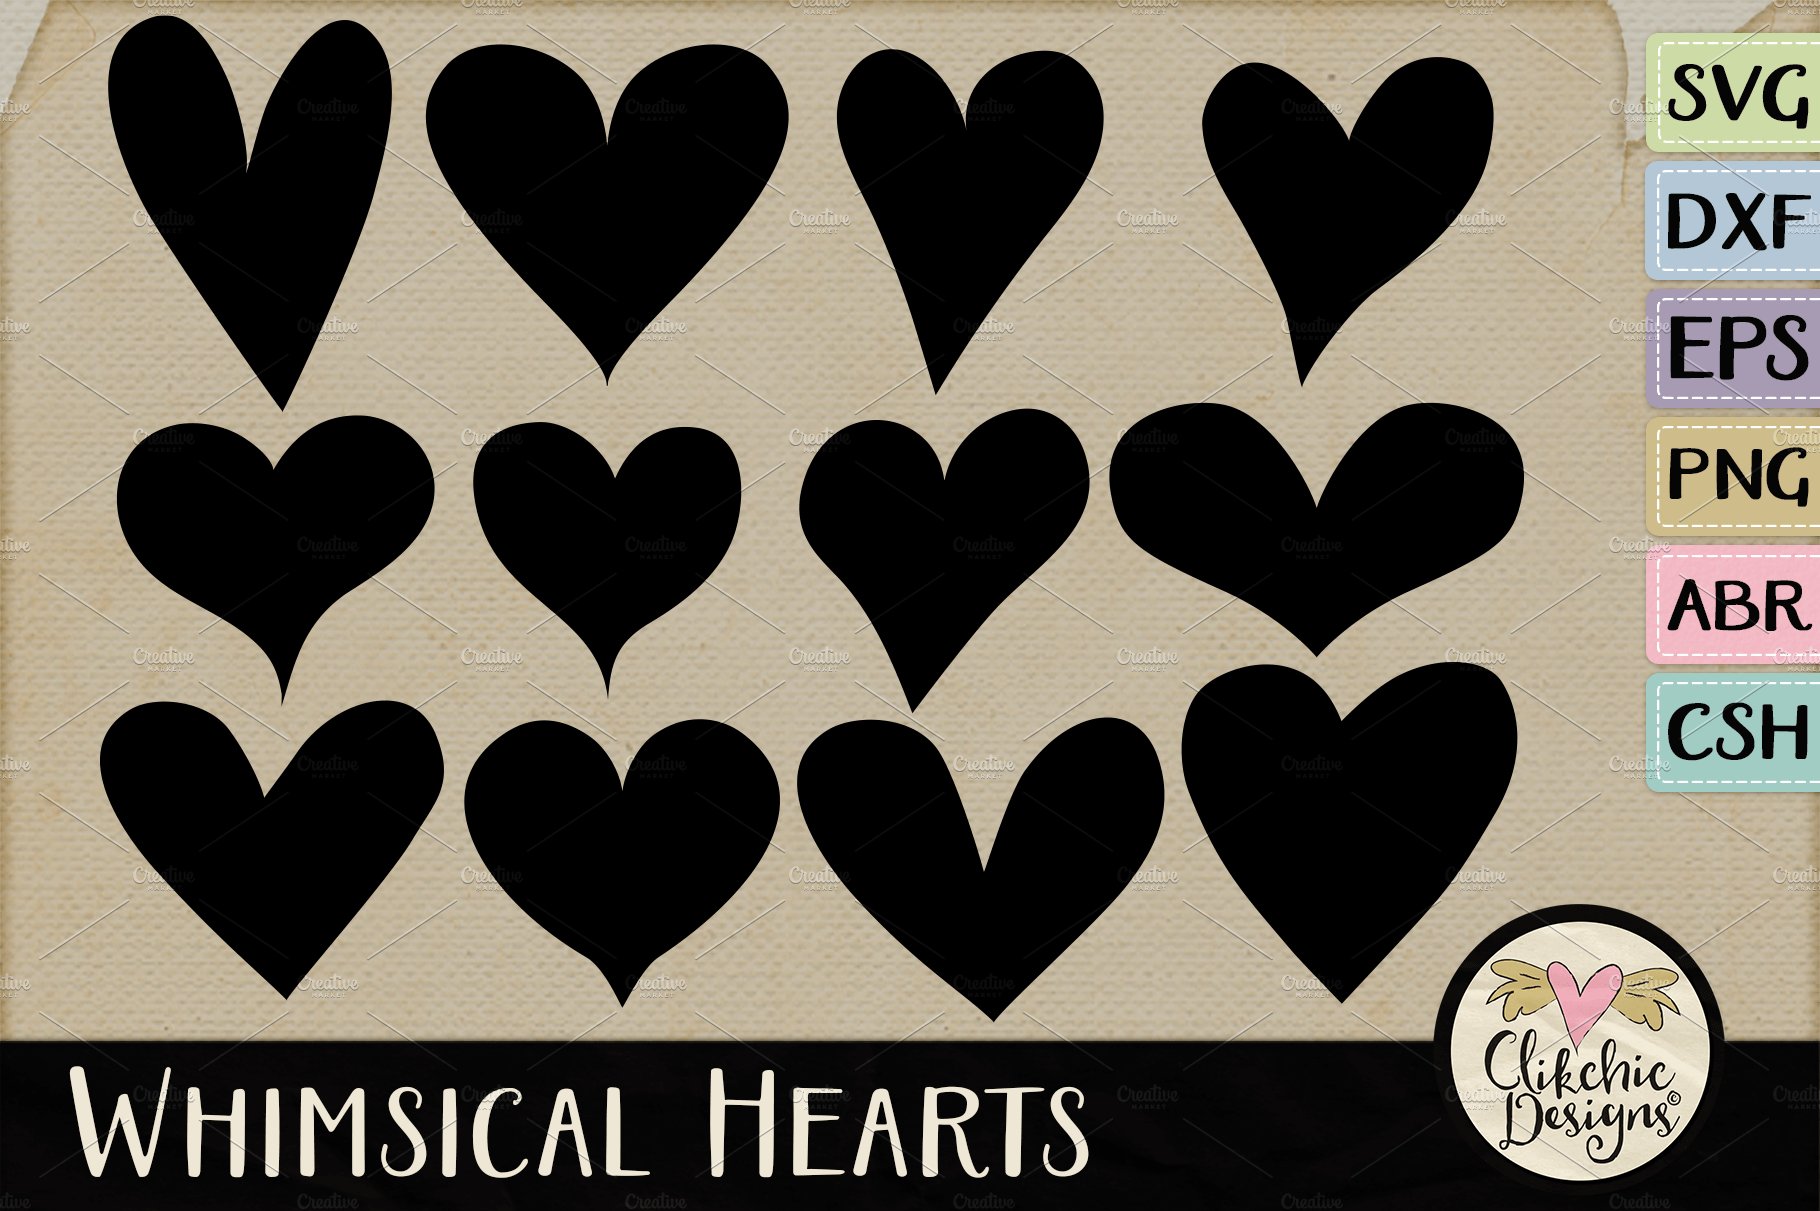 Heart Vector Shapes & Cutting Filescover image.